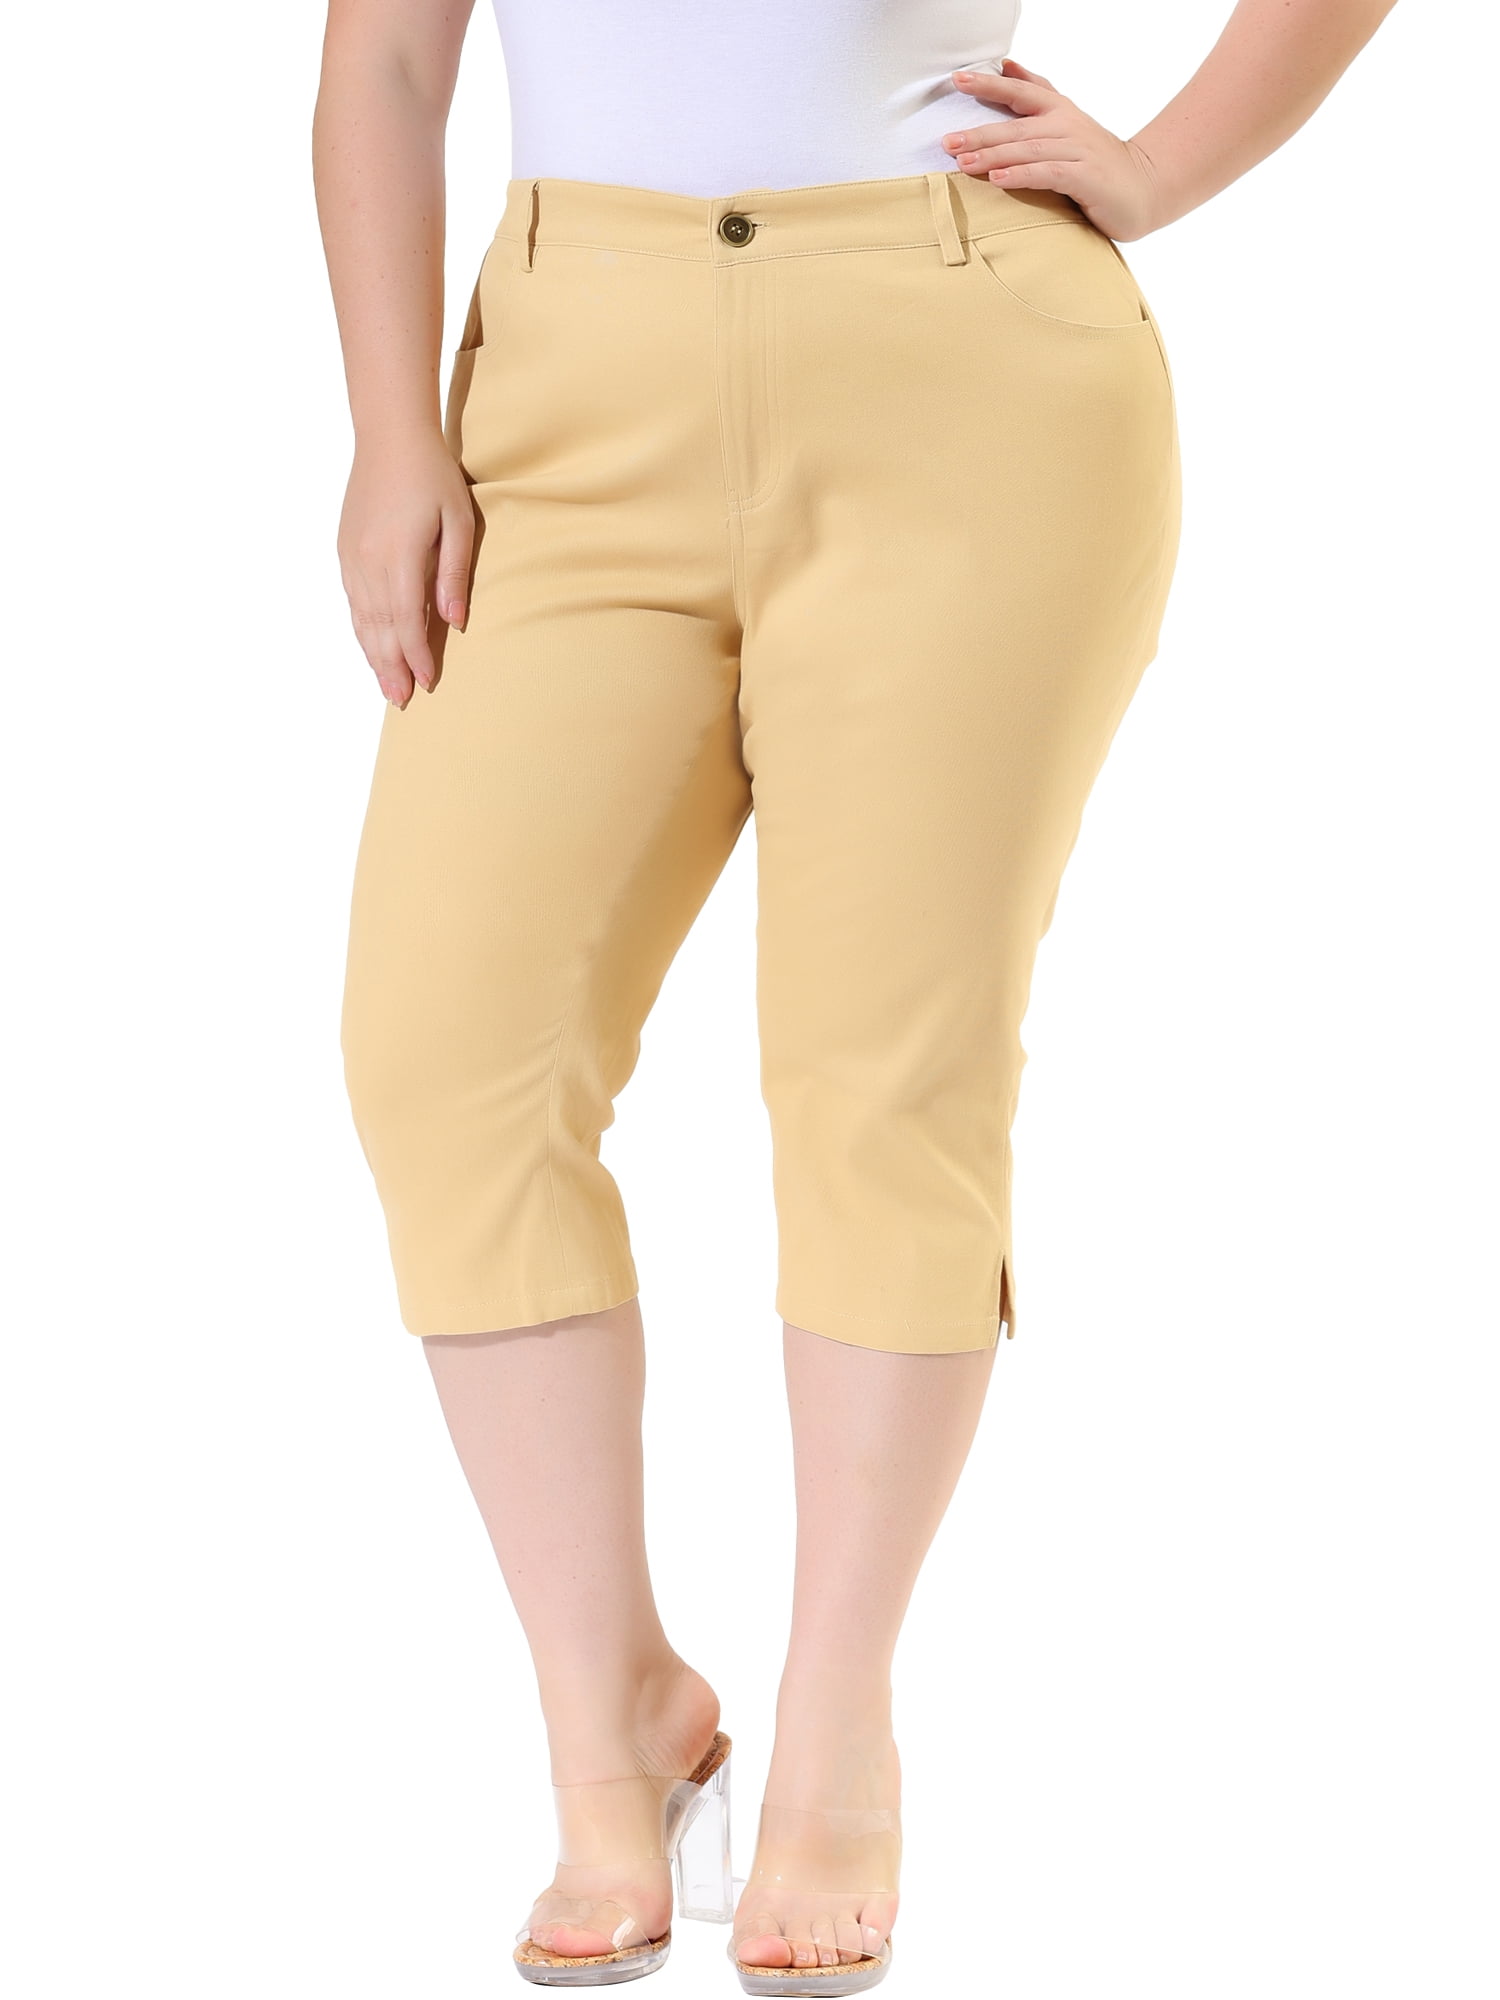 WOMEN'S CAPRI  PANTS WITH BUTTONS AND REAR POCKET 